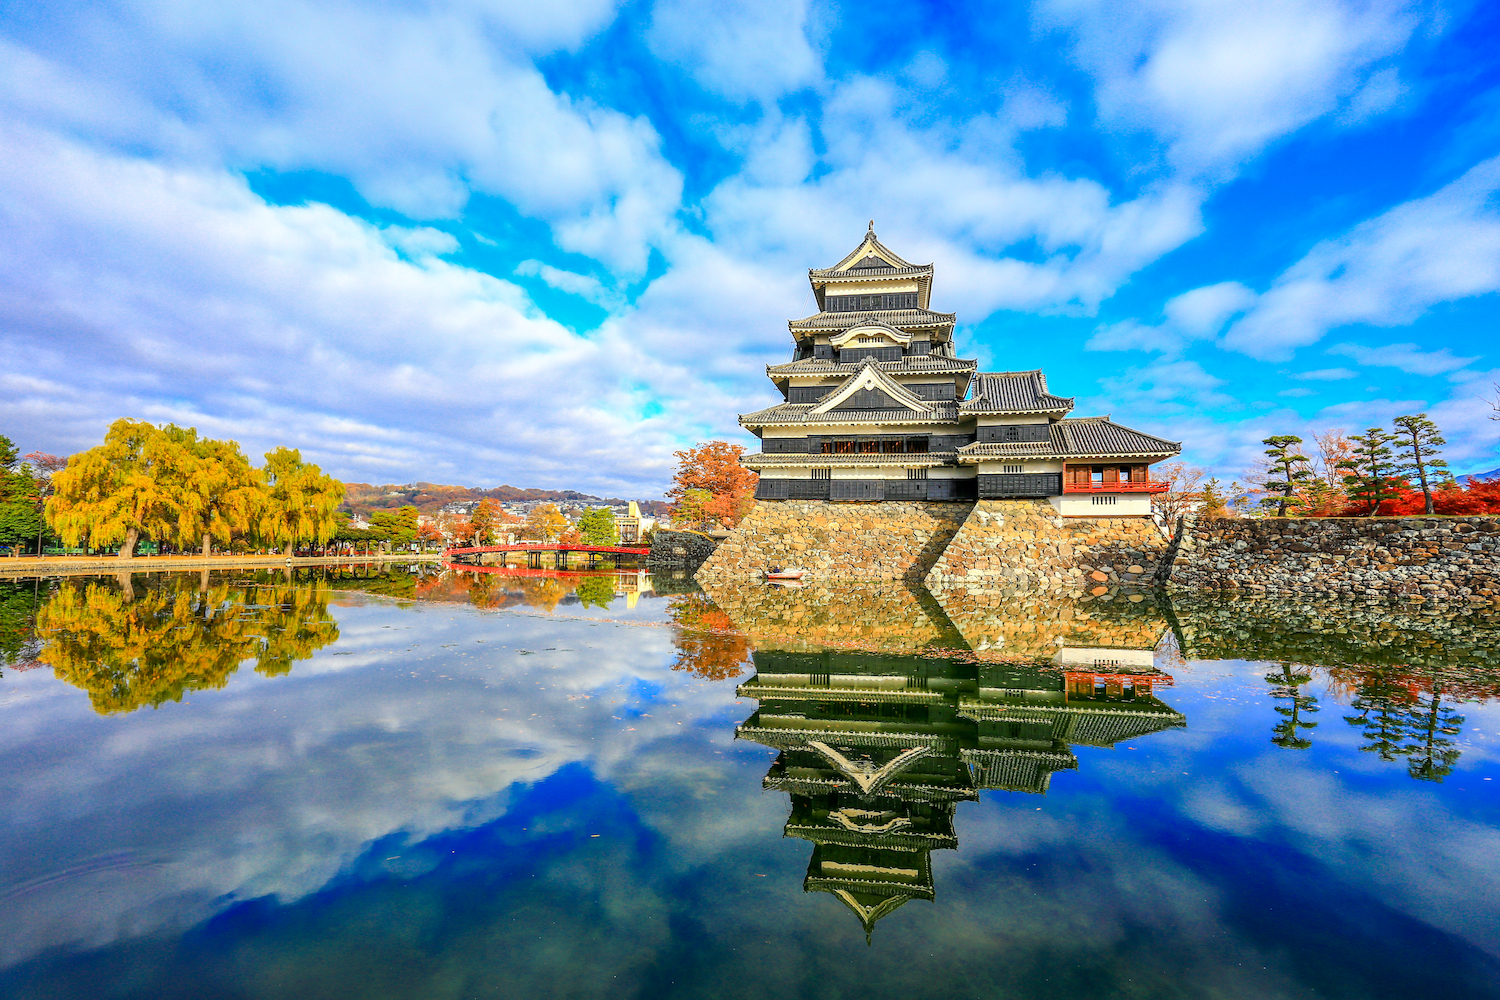 Matsumoto Castle is one of Japan's premier historic castles, along with Himeji Castle and Kumamoto Castle. The building is also known as the "Crow Castle" due to its black exterior.